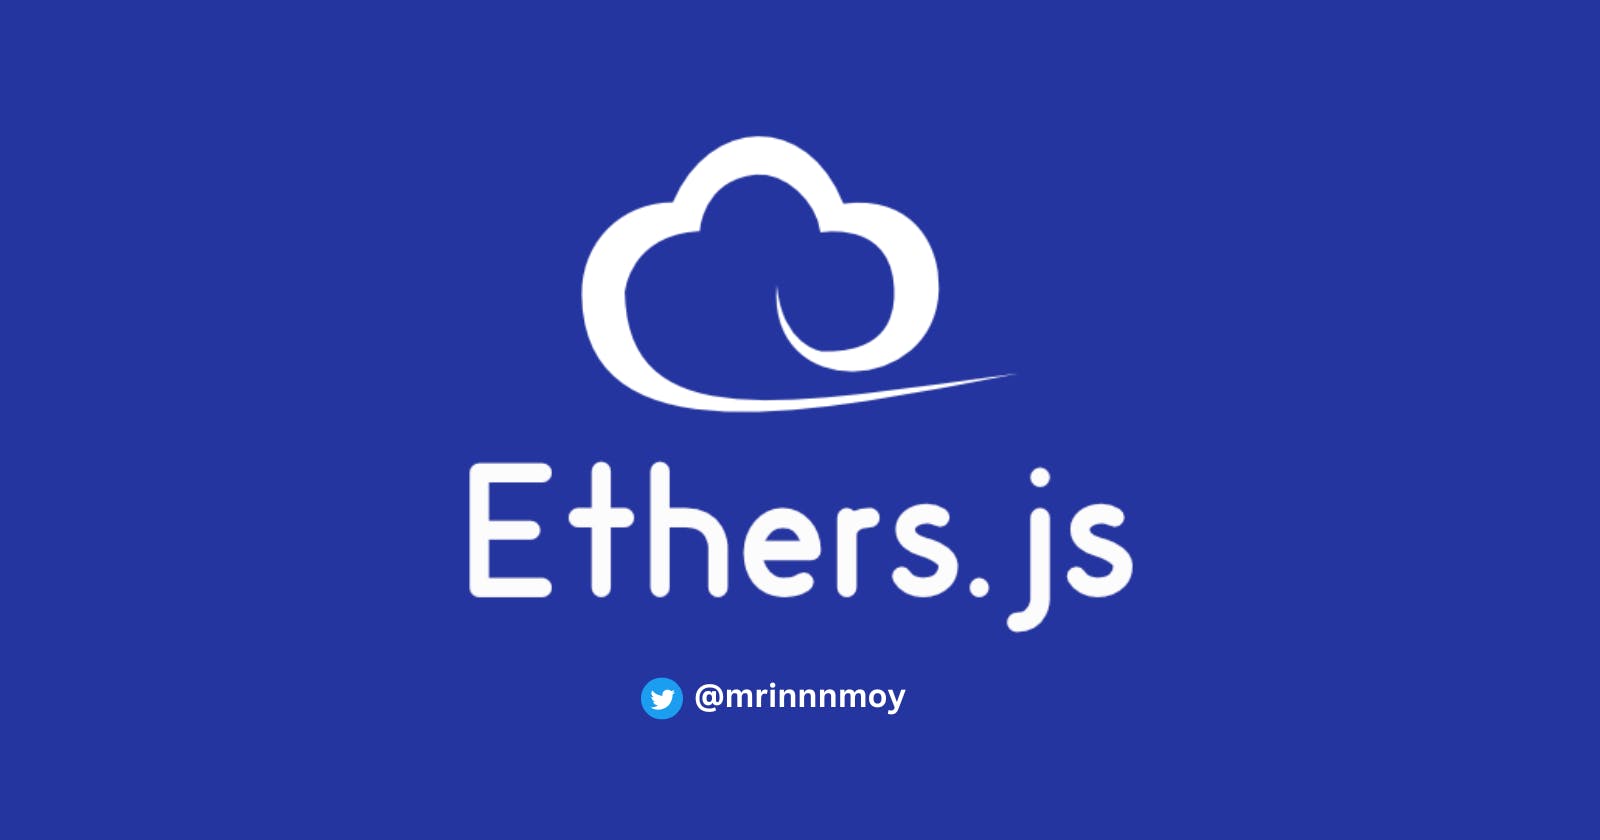 Ethers.js: Interacting with The Ethereum Blockchain.